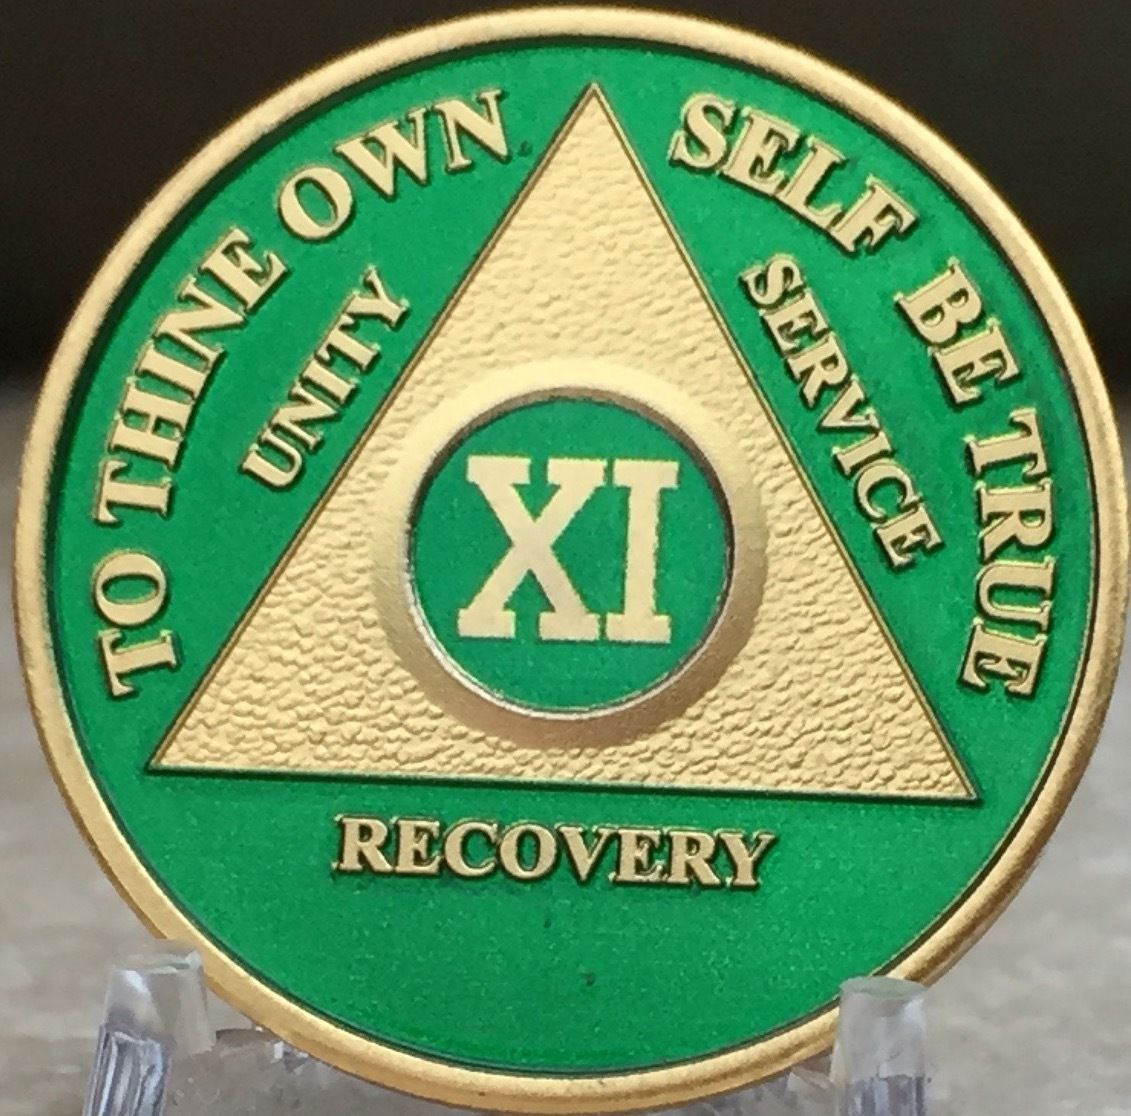 11 Year AA Medallion Green Gold Plated Alcoholics Anonymous Sobriety Chip Coin